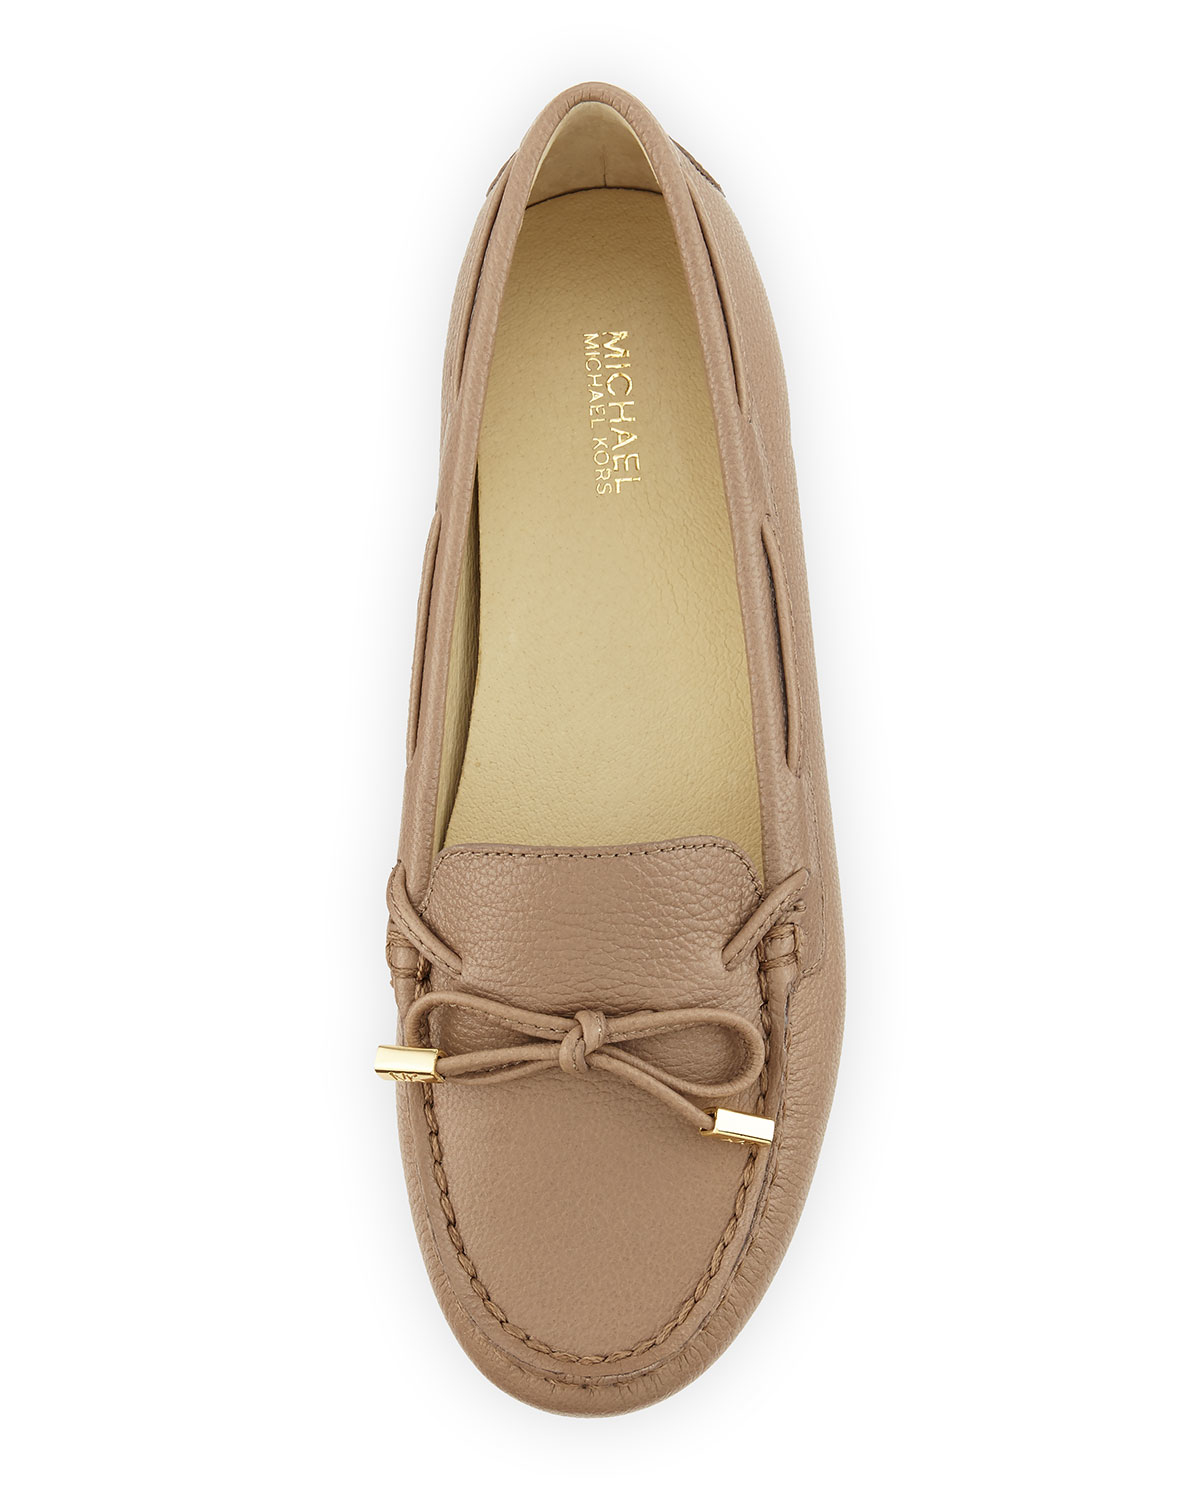 Lyst - Michael Michael Kors Daisy Leather Pebbled-Sole Moccasins in Brown